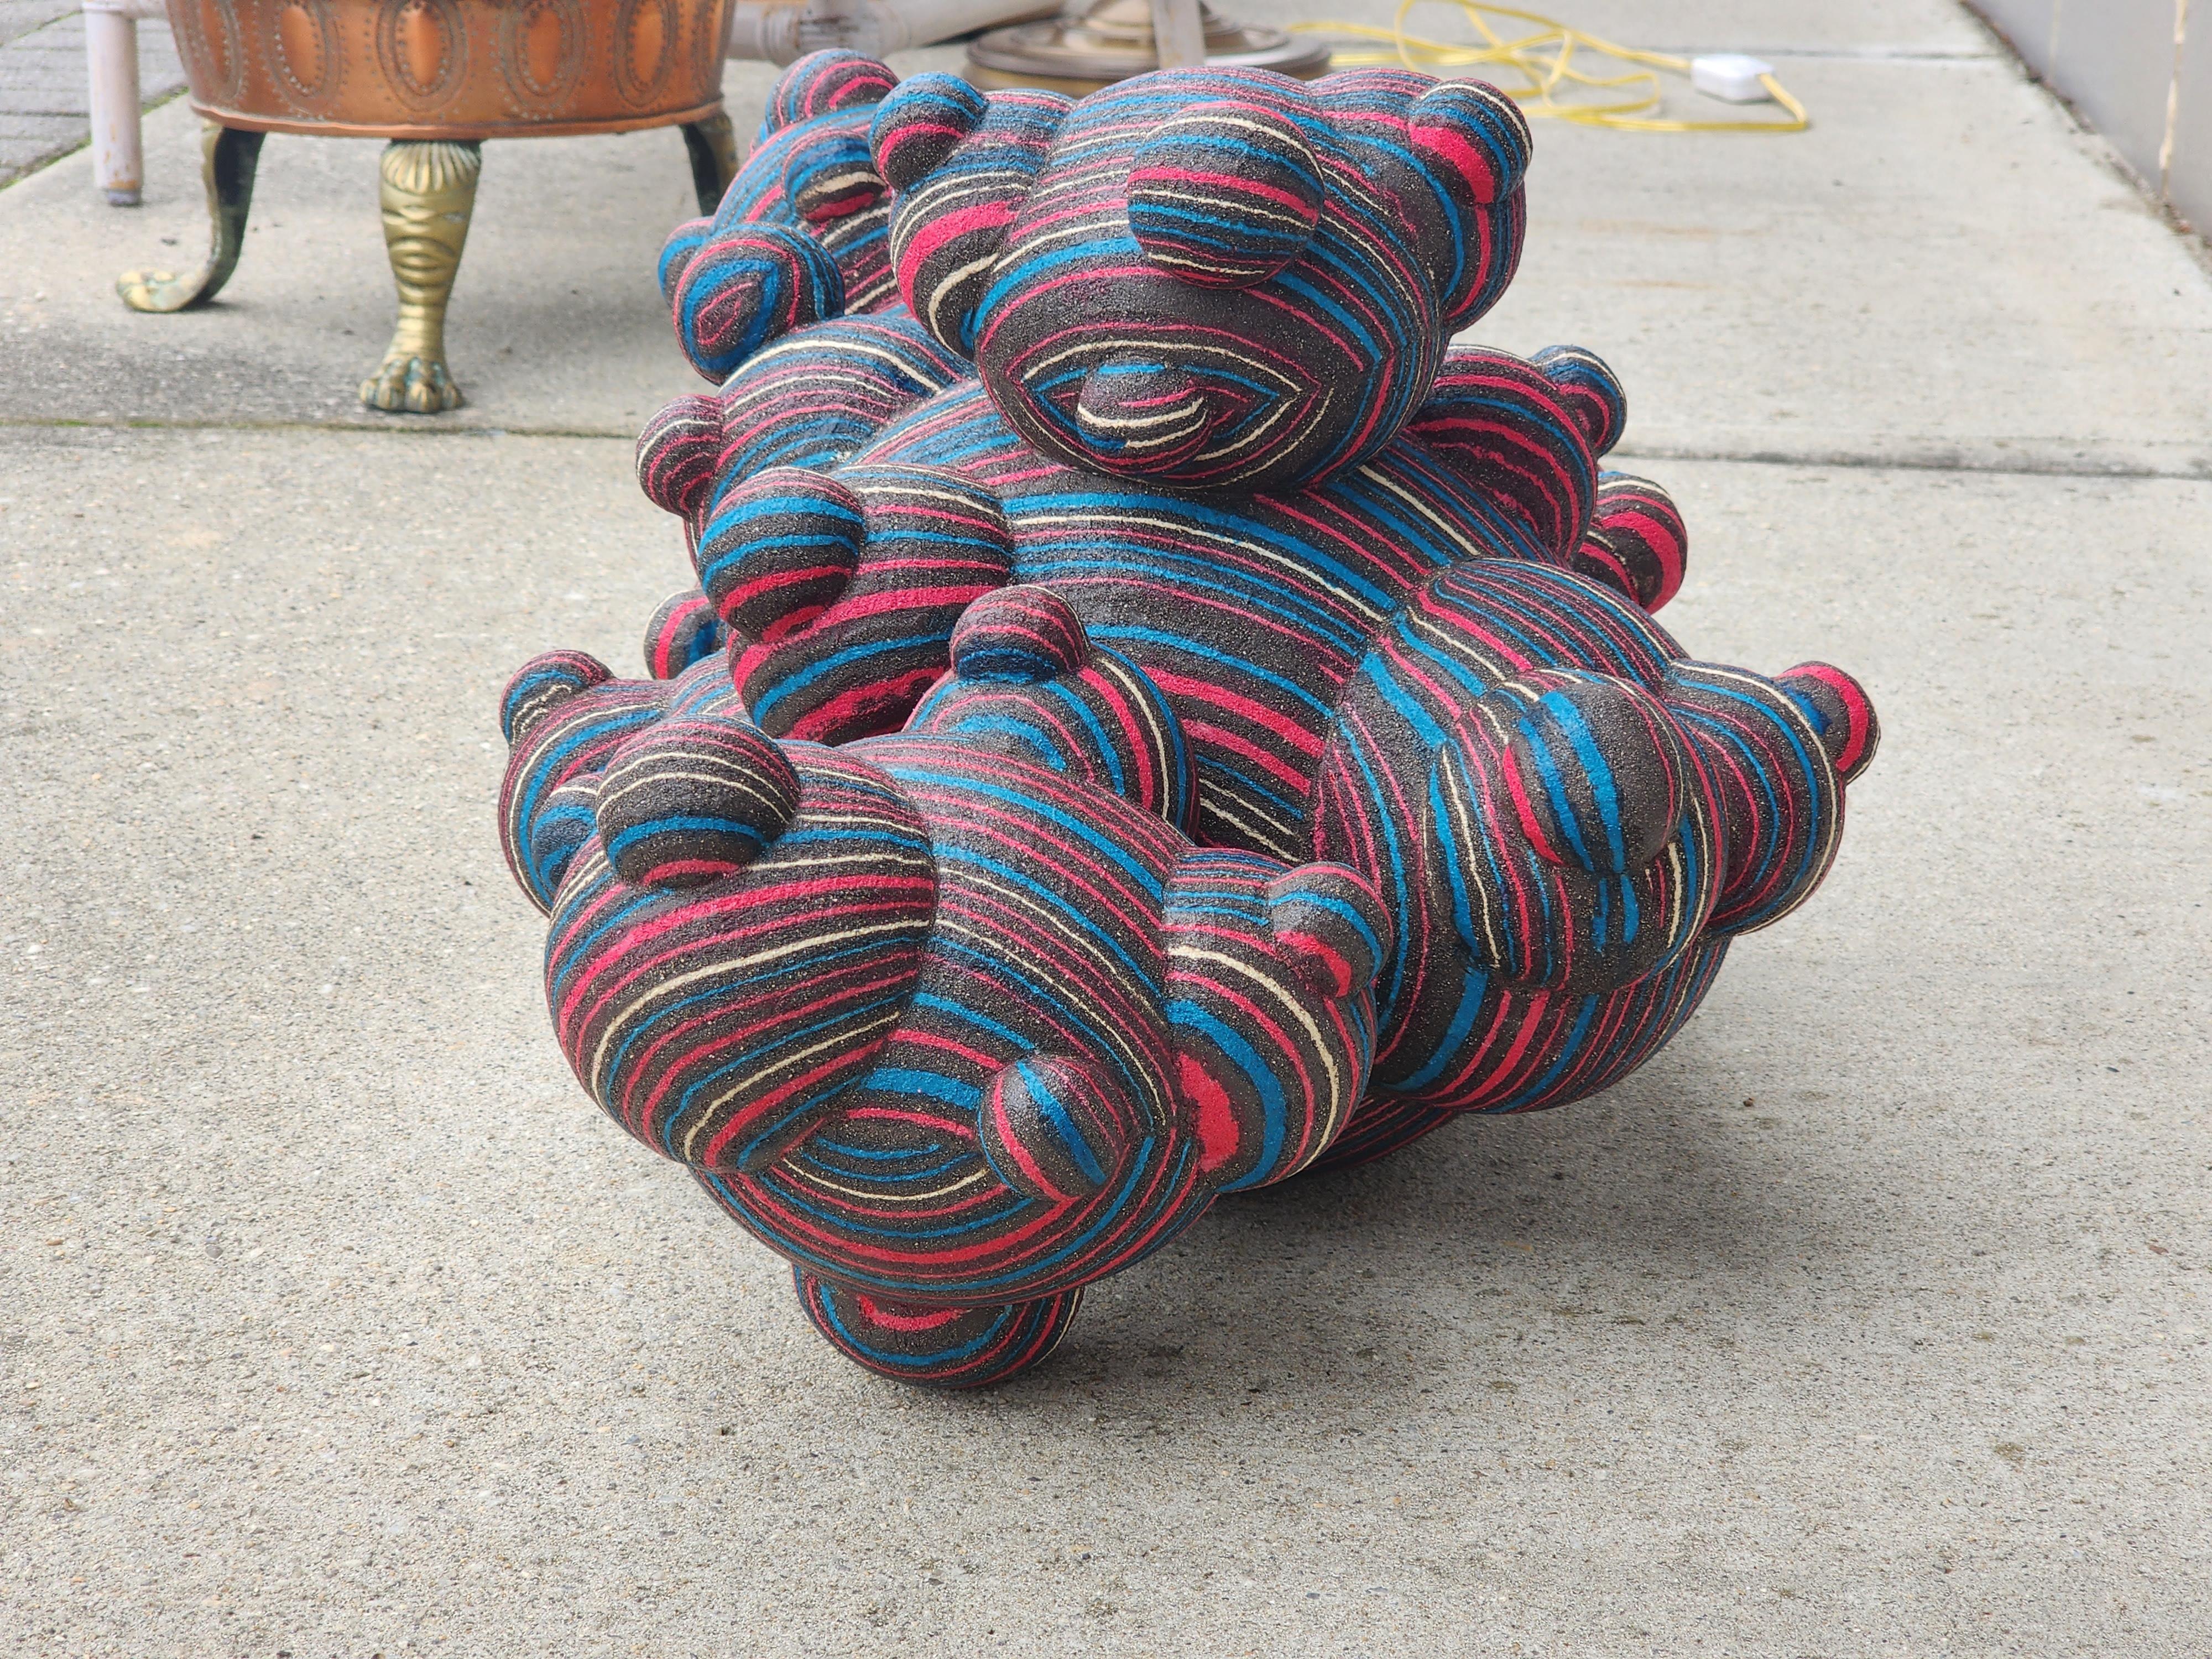 A large freeform organic 'spore' sculpture in stoneware hand crafted using the nerikomi technique by Lewis Trimble. The sculpture is constructed using the time consuming process of Nerikomi which is done by using different color clays and building